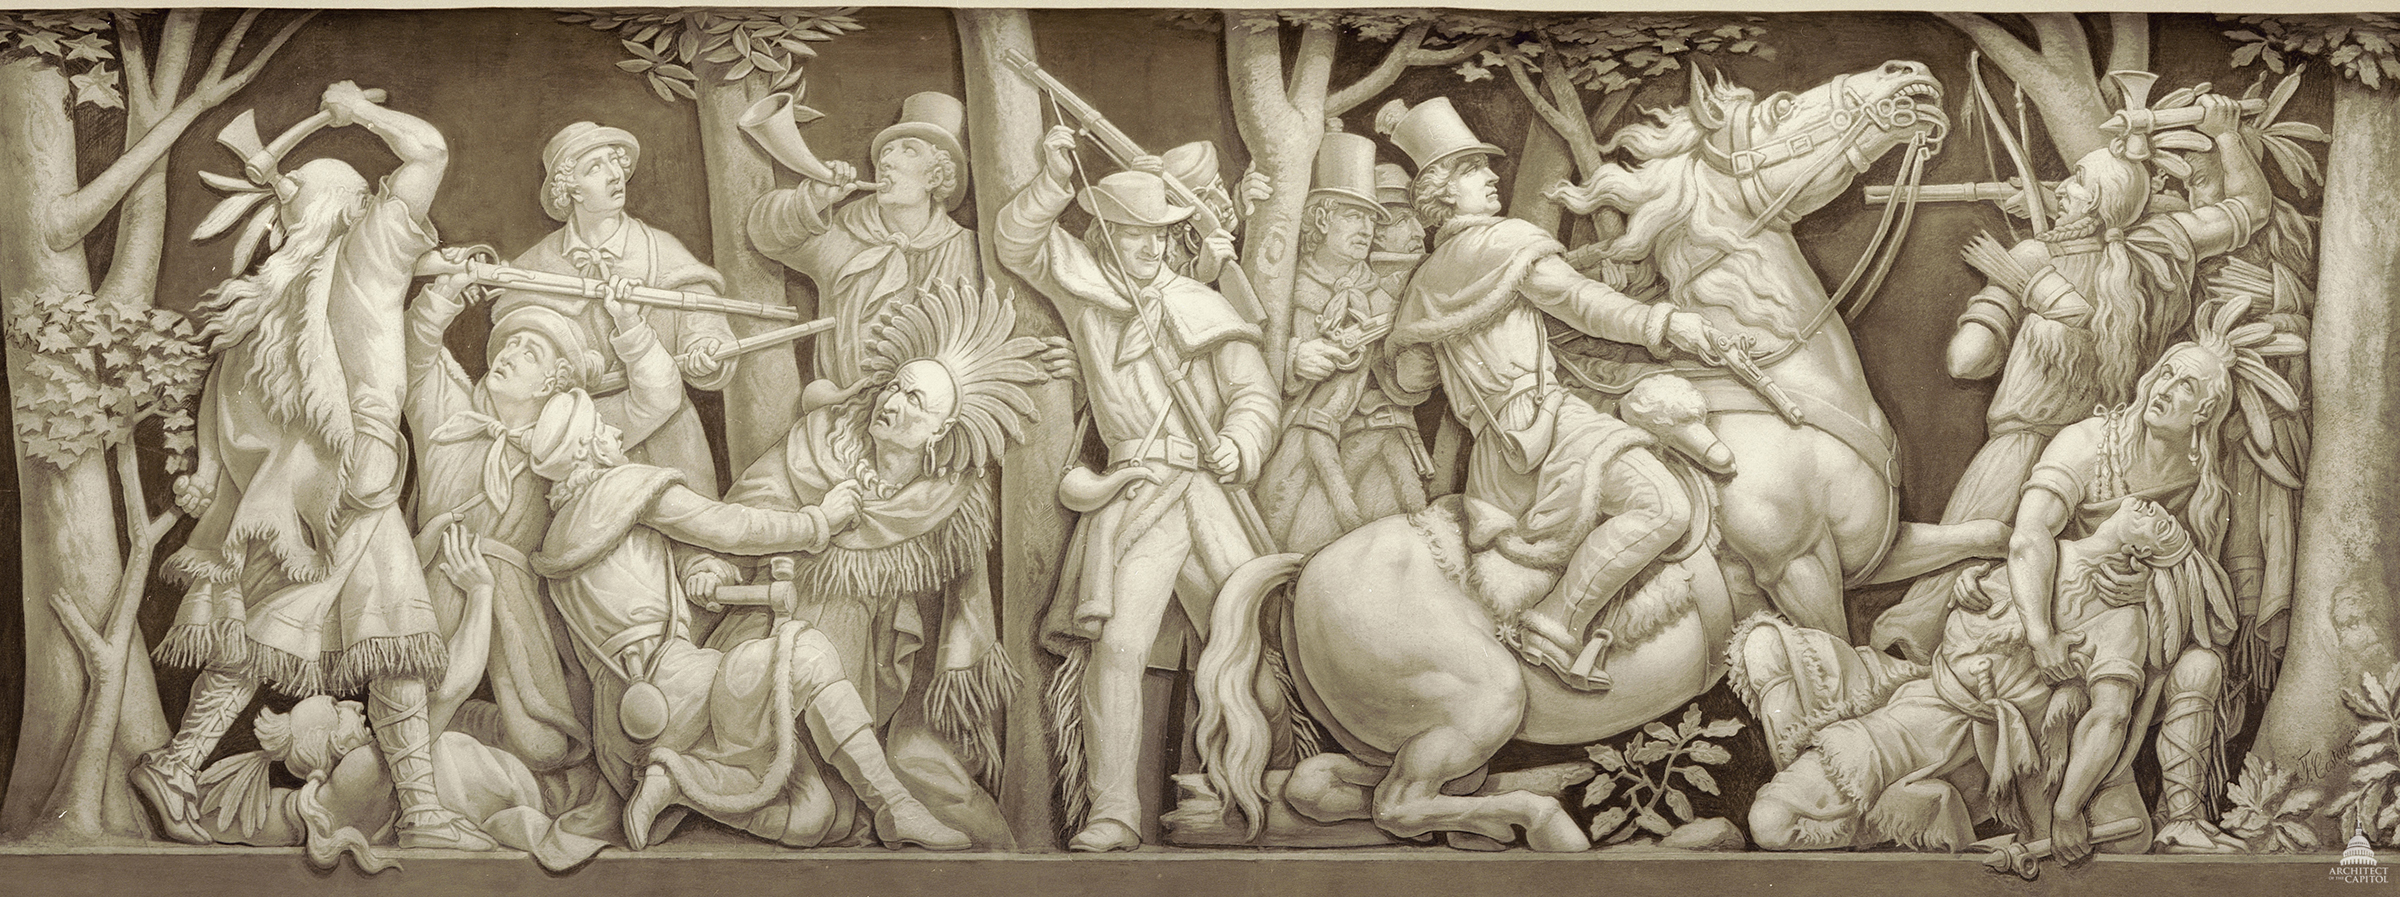 The frieze shows the 1813 death of the Shawnee chief Tecumseh, who formed intertribal coalitions to fight the settlers. Tecumseh is shown crumpled to the ground below Richard Mentor Johnson. (Architect of the Capitol)